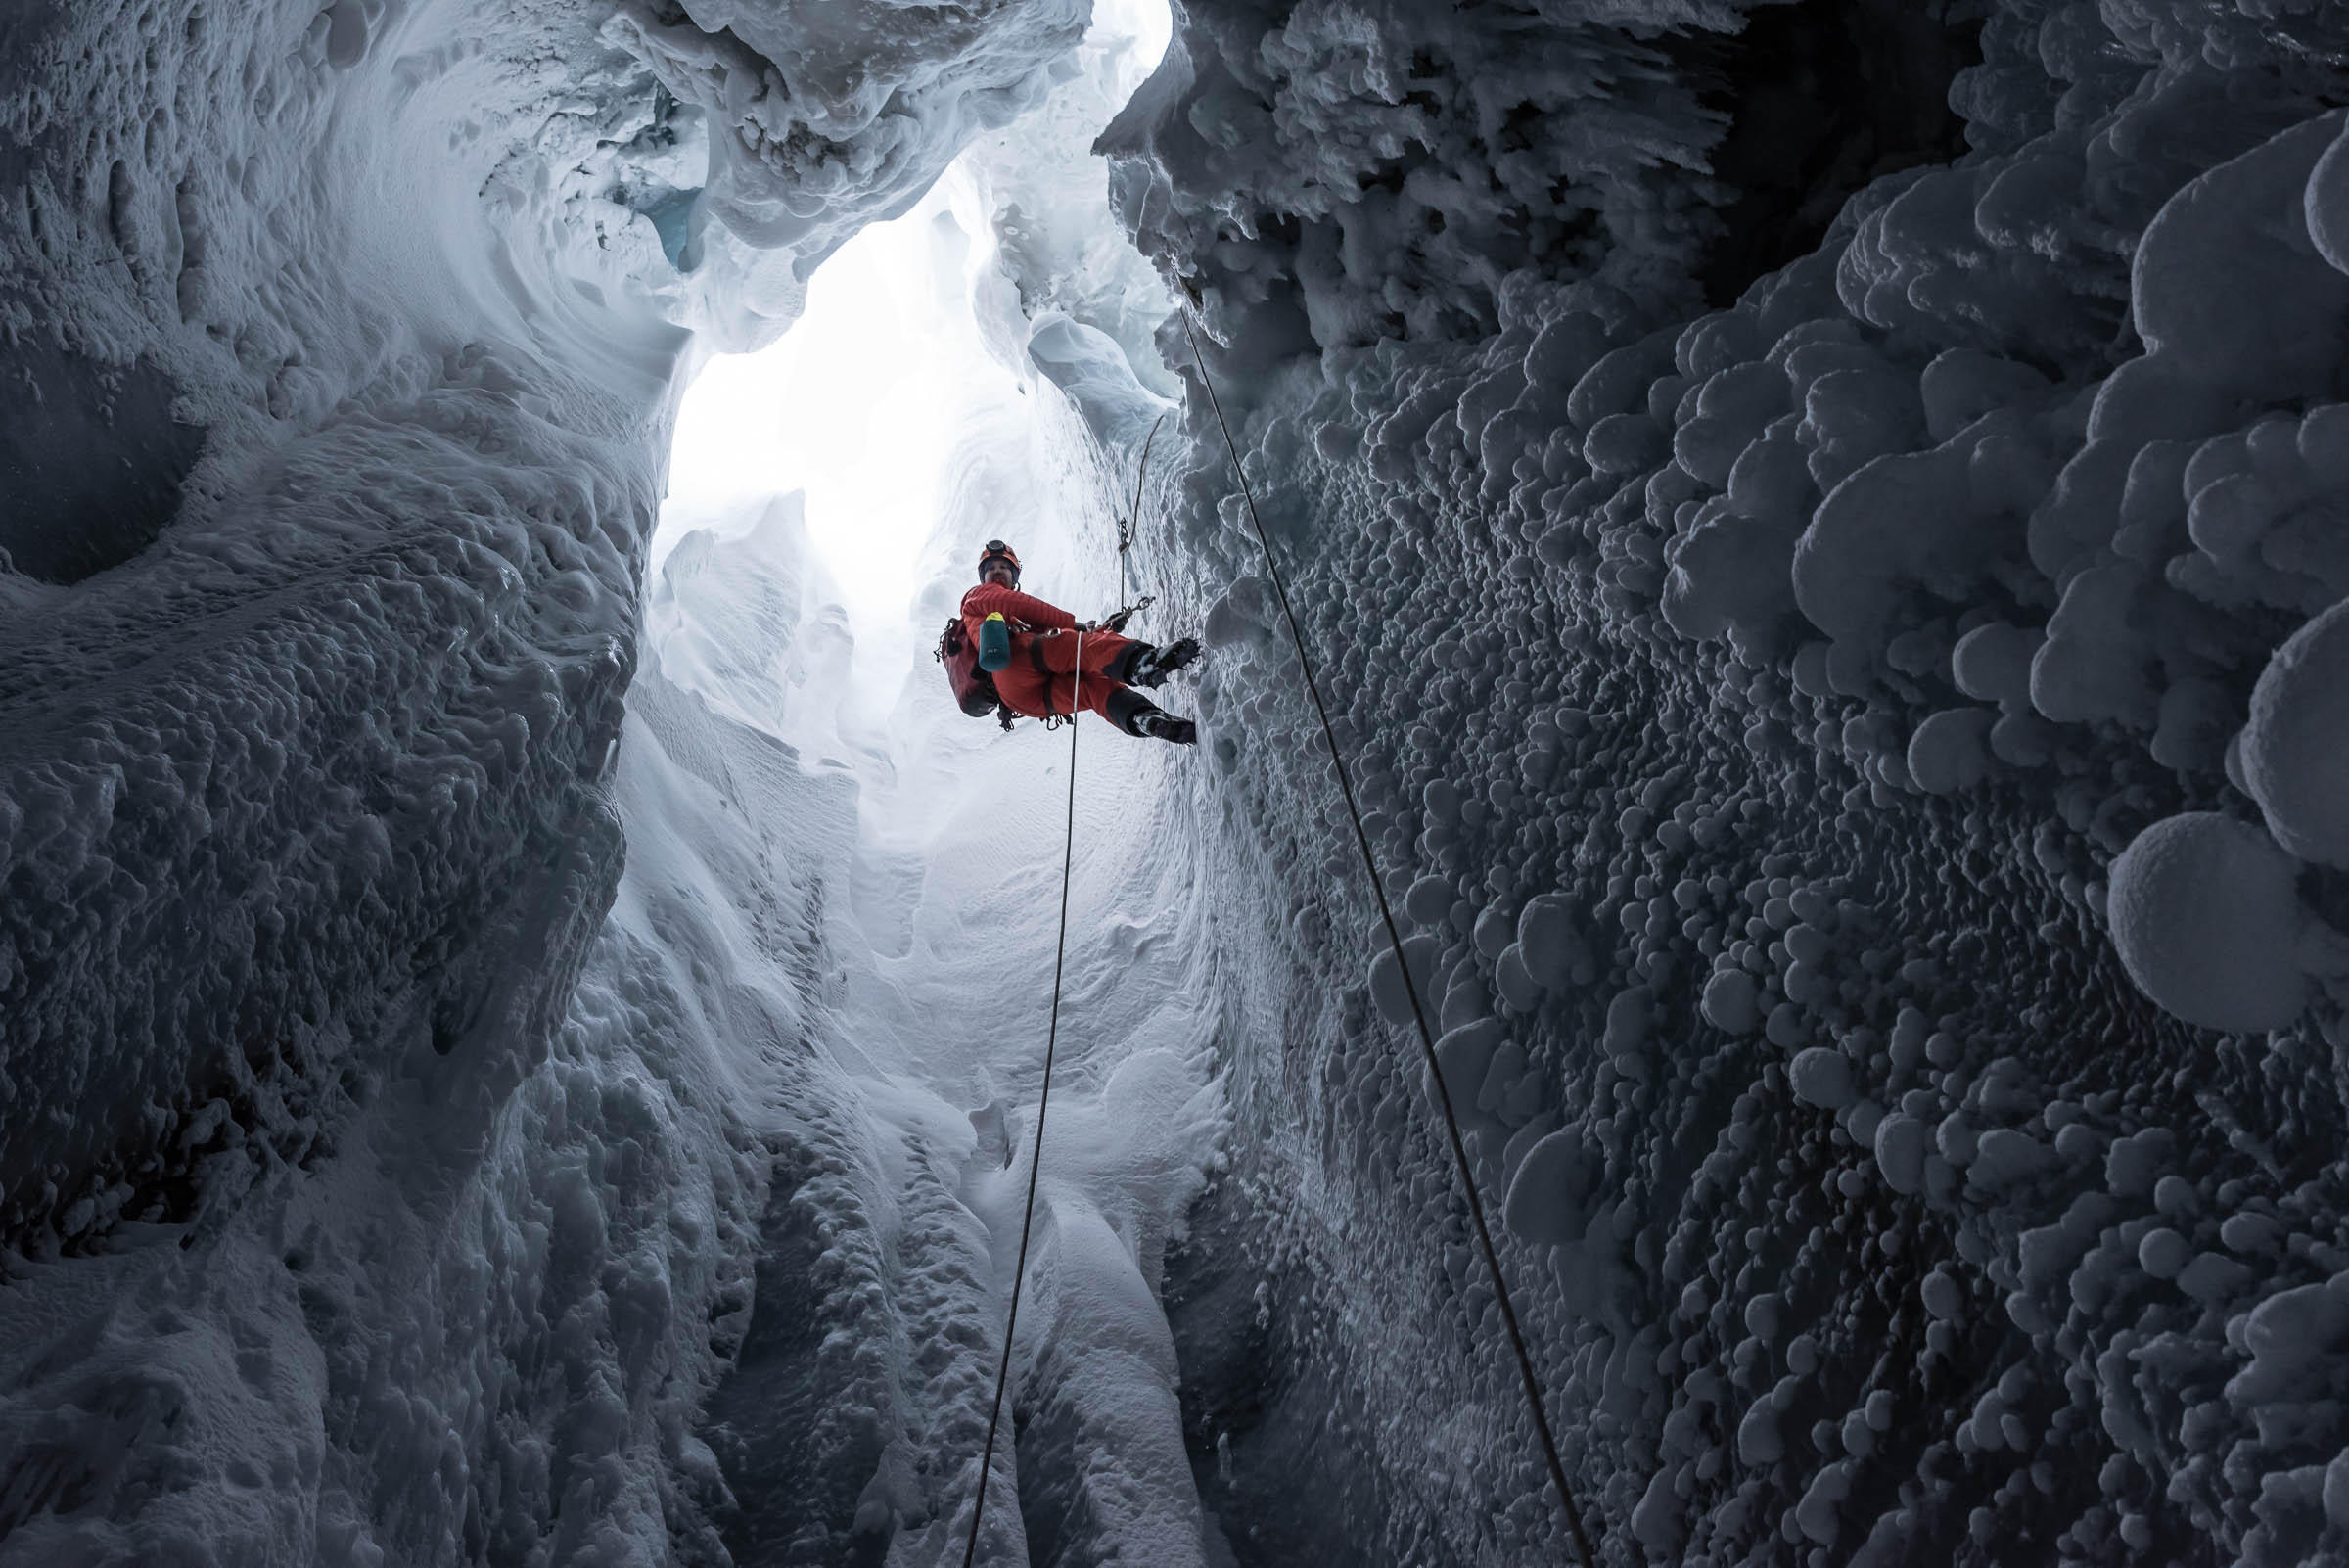 Seen from below, a man abseils into the glacier